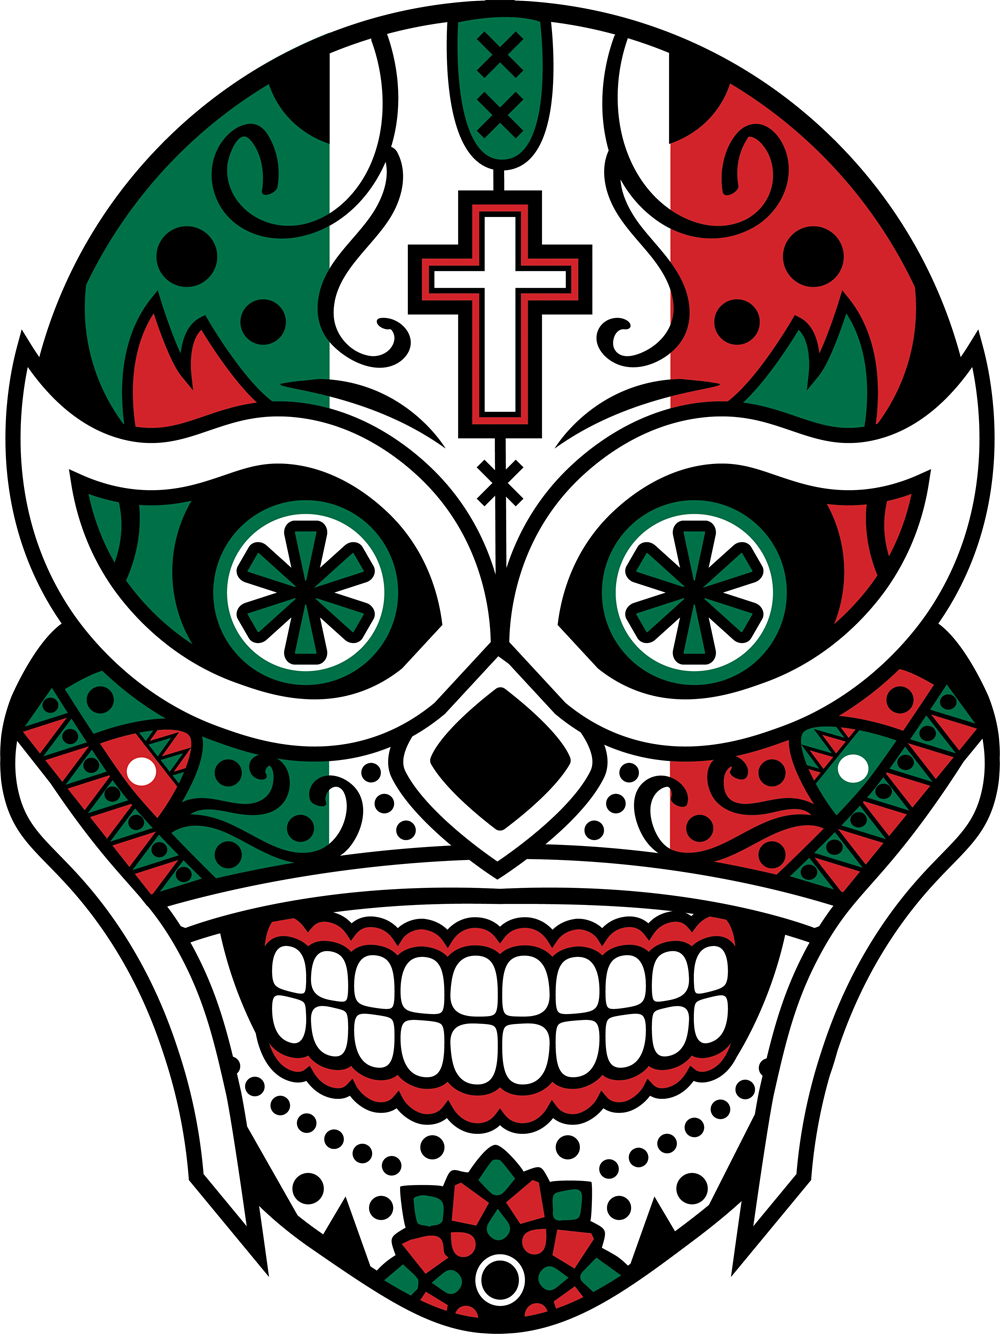 Combining Our Love Of Sugar Skulls And Luche Libre - Combining Our Love Of Sugar Skulls And Luche Libre (1000x1334)